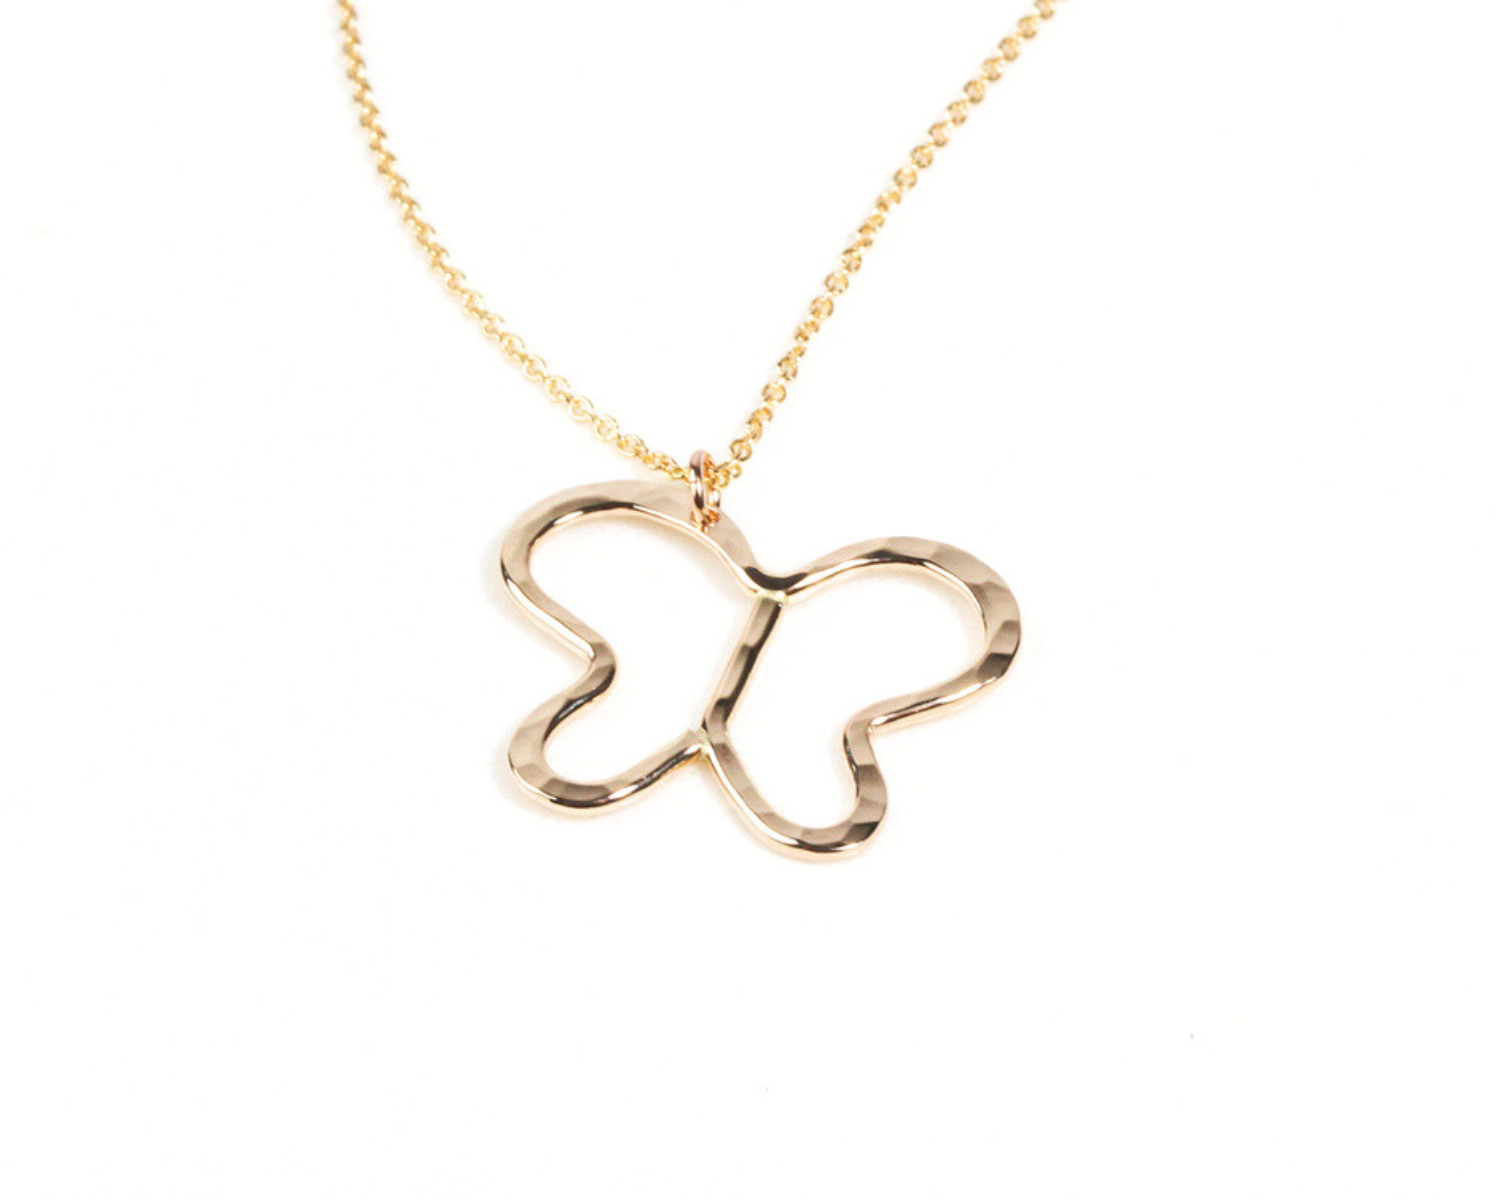 This Butterfly Necklace is exquisitely handcrafted with elevated materials to bring the magic of the butterfly to every day. Bring a flutter of enchantment wherever you go with this butterfly Necklace. Pictured here in rose gold filled.